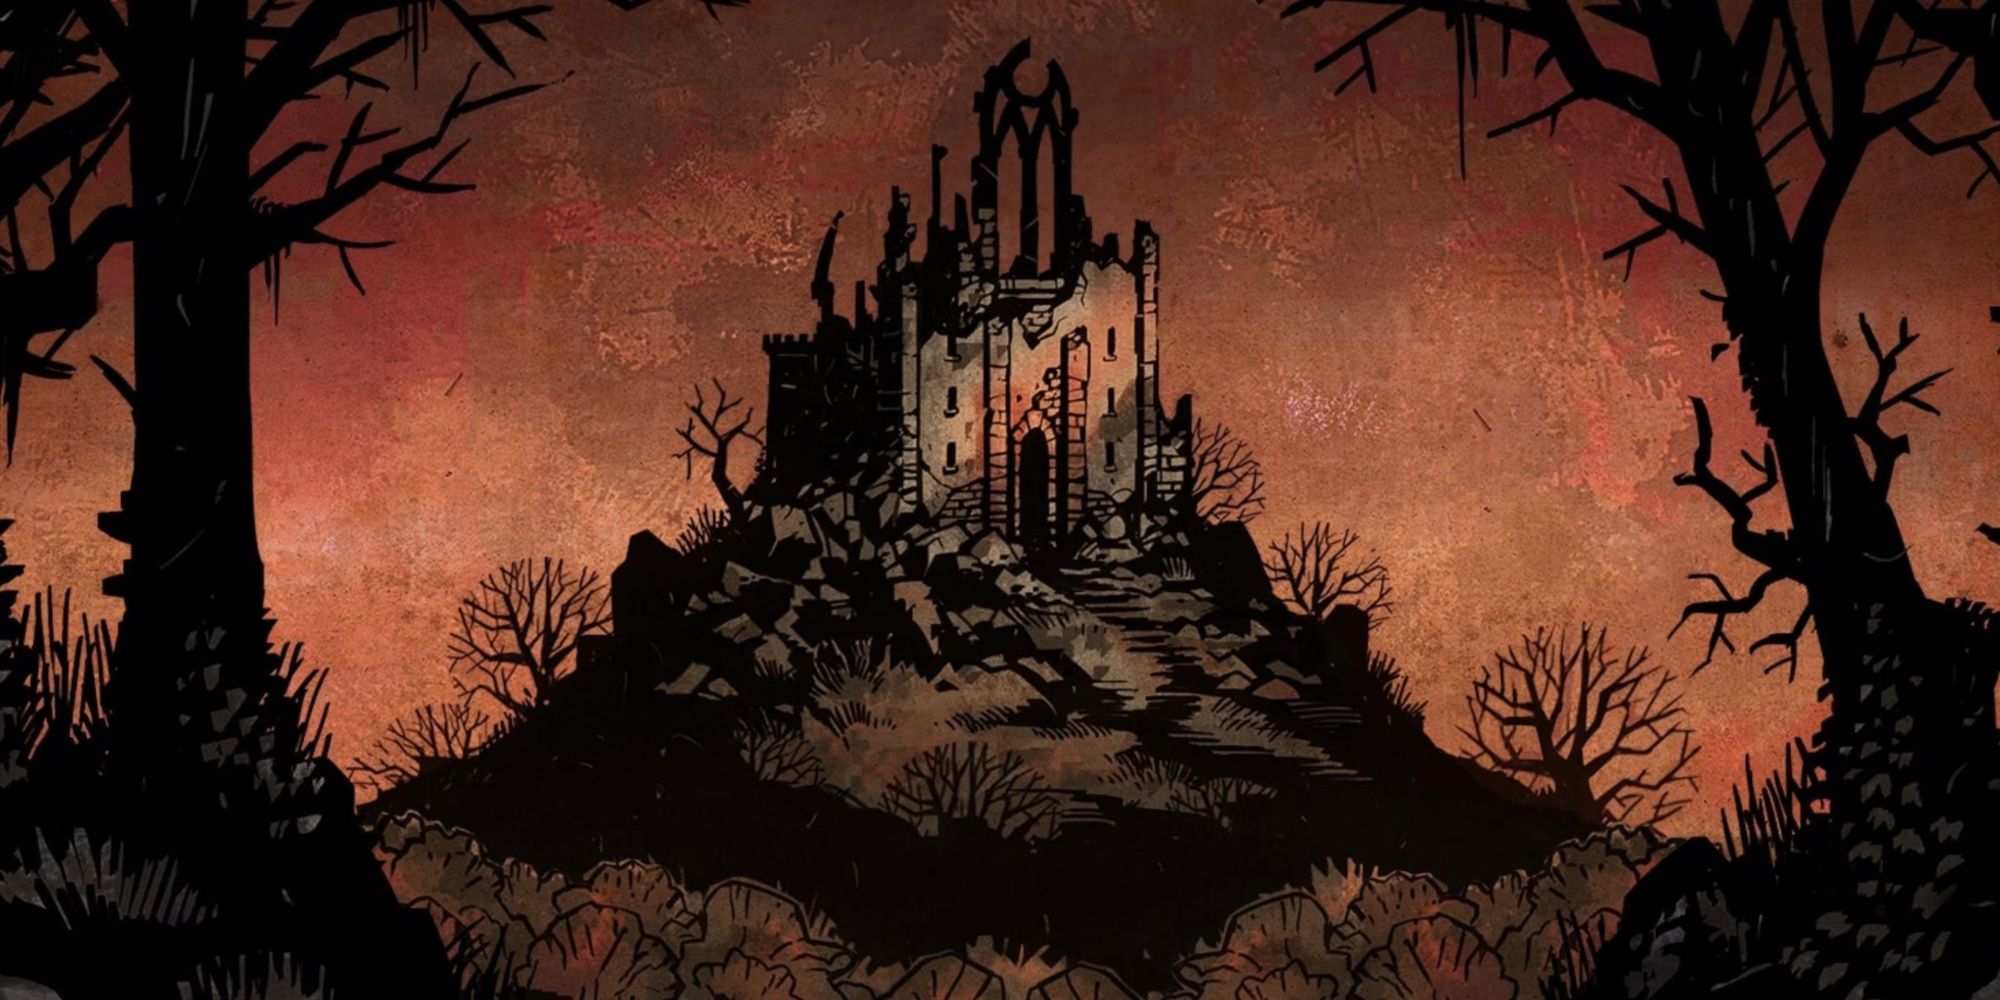 The ruins of a castle on a hill, through a dark forest.